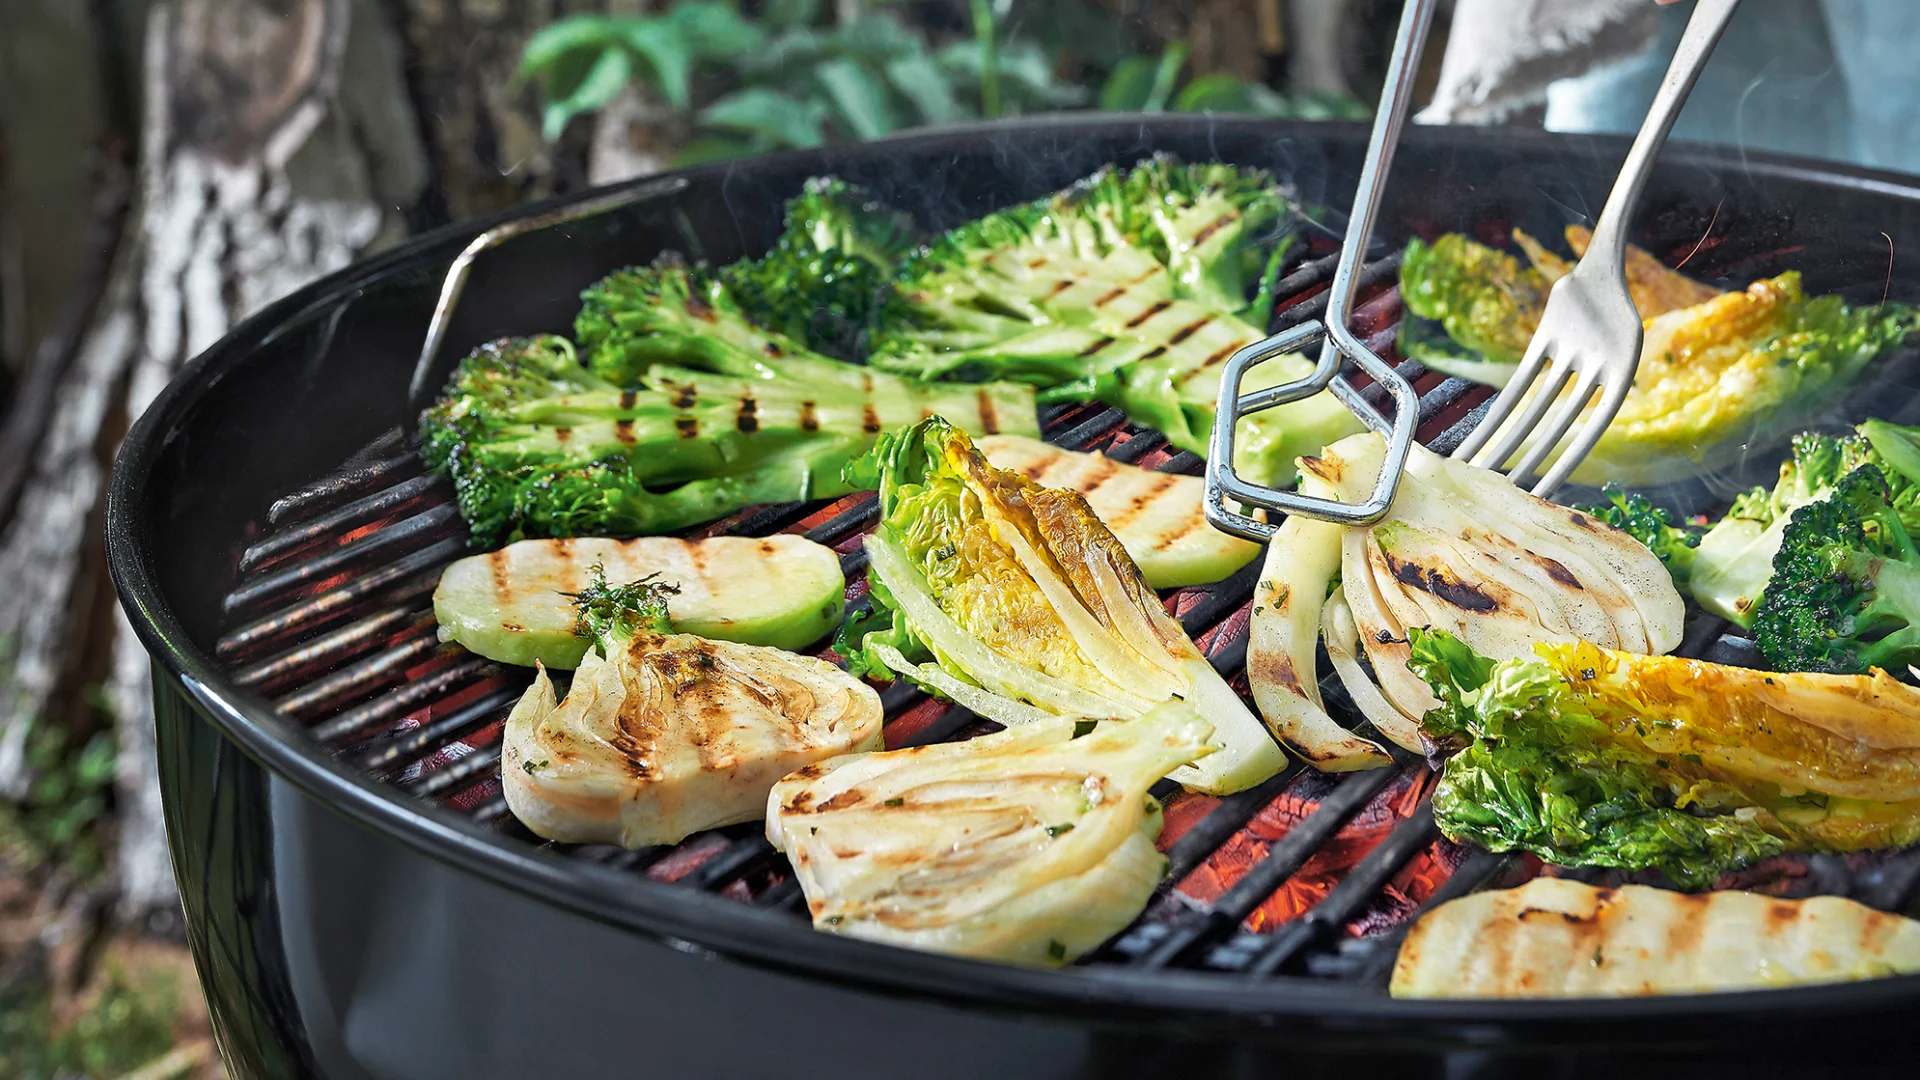 Broccoli and fennel on the barbecue.